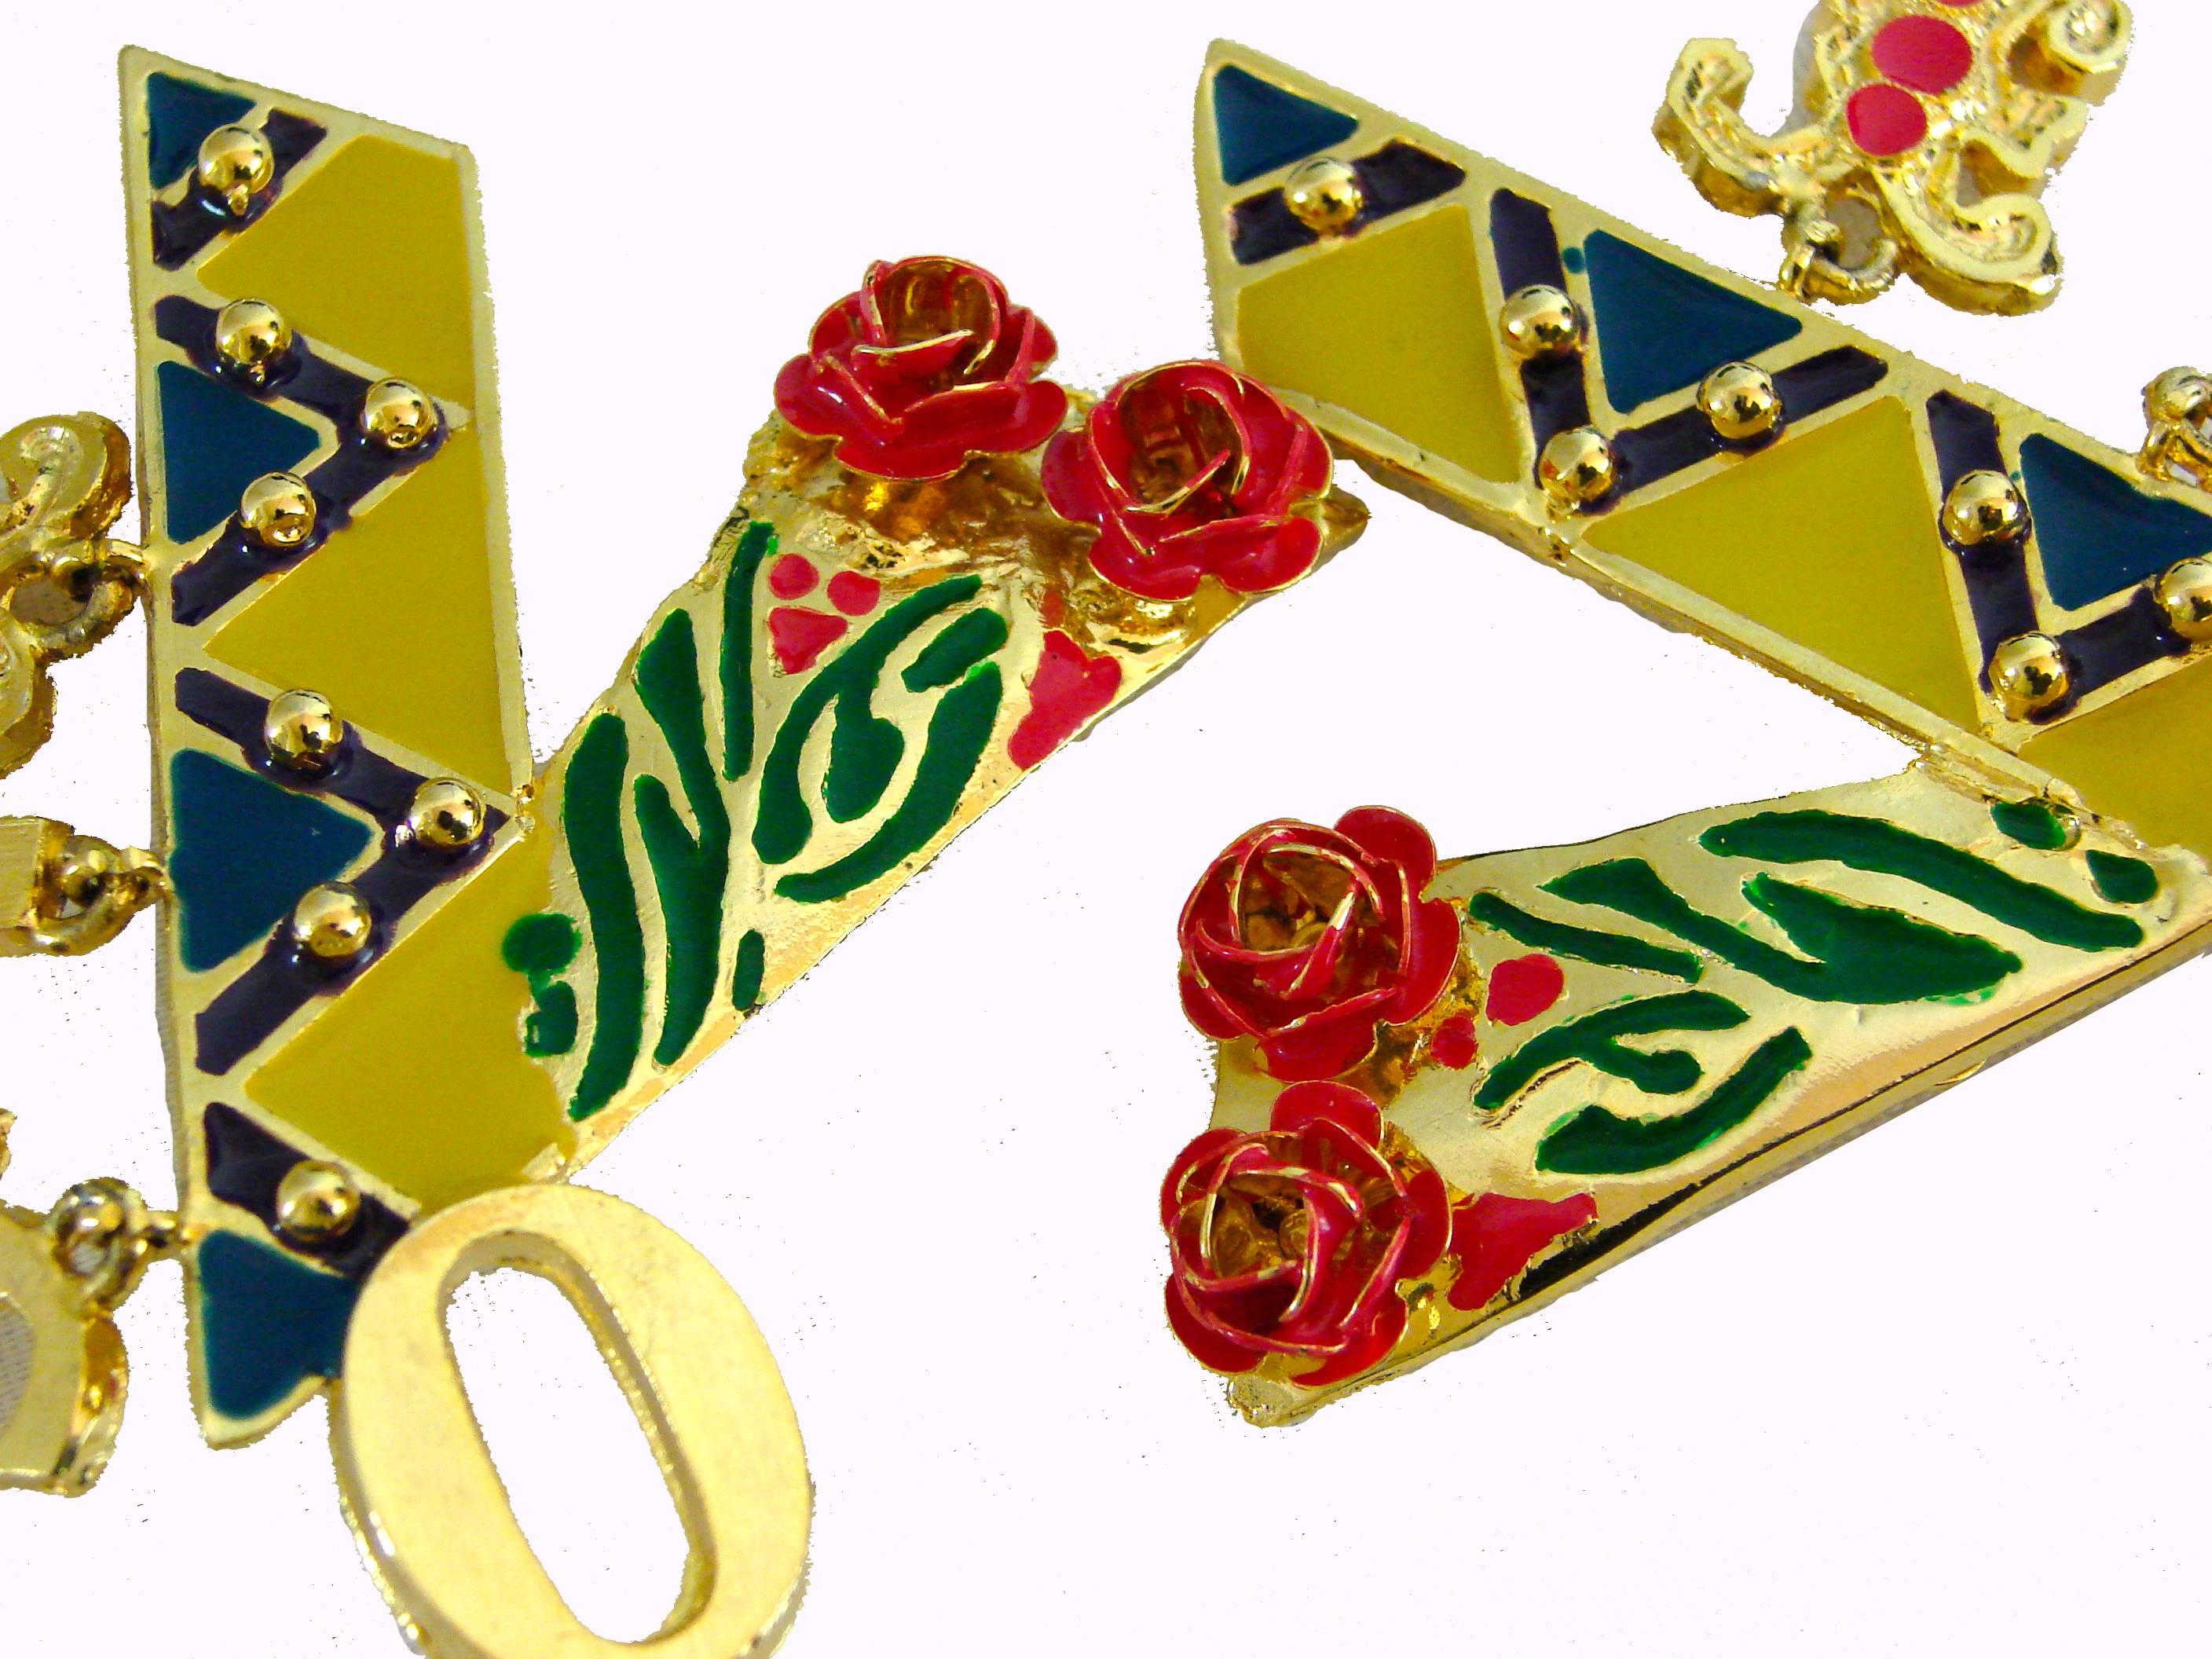 Contemporary Original Gianni Versace Large Vogue Cover Earrings Enamel with Roses 1990s + Box